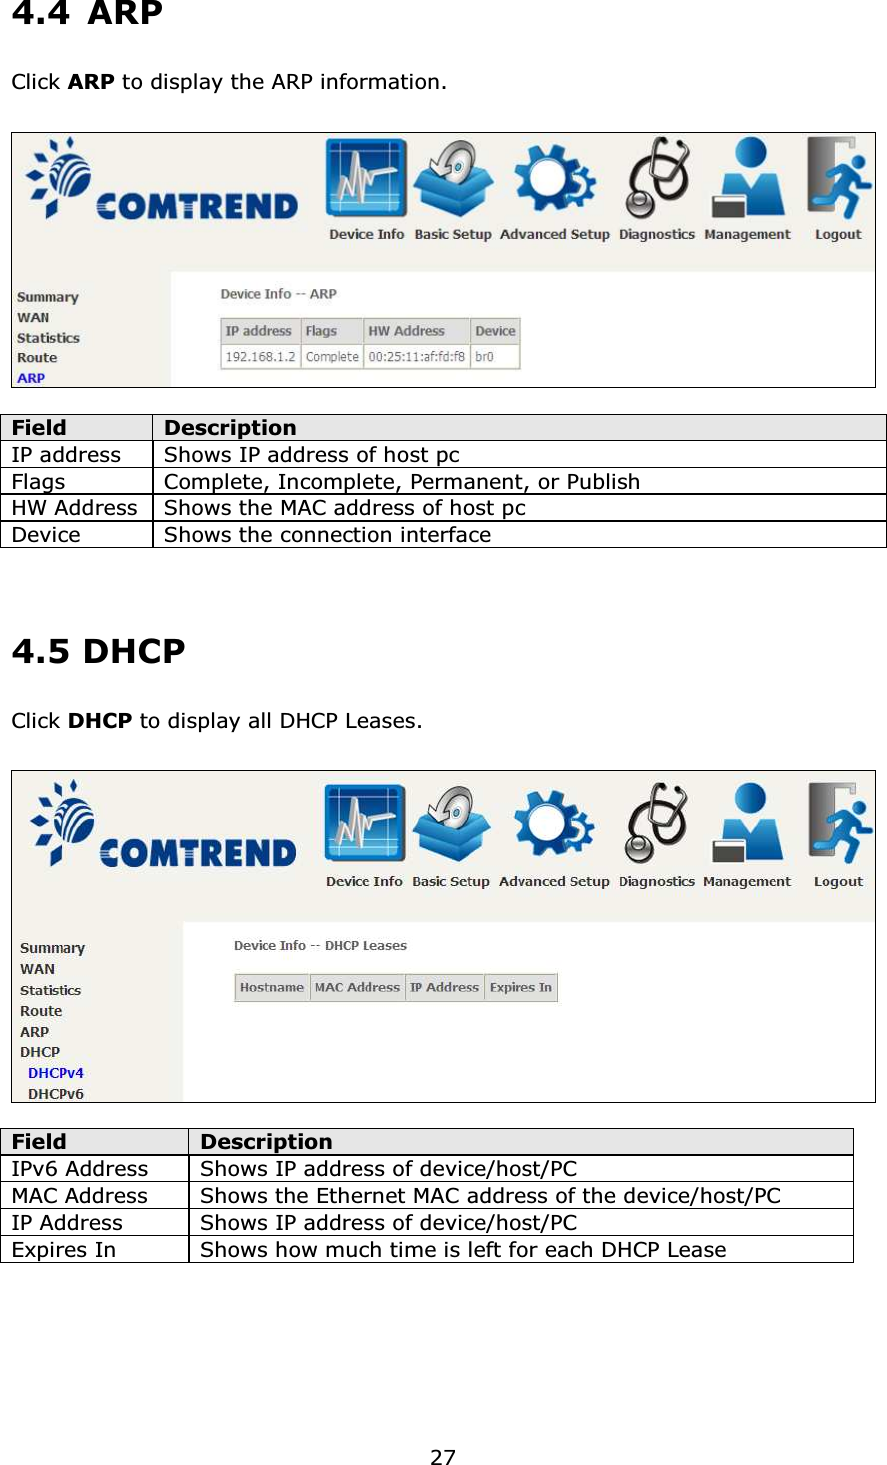  274.4 ARP Click ARP to display the ARP information.    Field  Description IP address  Shows IP address of host pc Flags  Complete, Incomplete, Permanent, or Publish HW Address Shows the MAC address of host pc Device  Shows the connection interface      4.5 DHCP Click DHCP to display all DHCP Leases.    Field  Description IPv6 Address  Shows IP address of device/host/PC MAC Address  Shows the Ethernet MAC address of the device/host/PC IP Address  Shows IP address of device/host/PC Expires In  Shows how much time is left for each DHCP Lease 